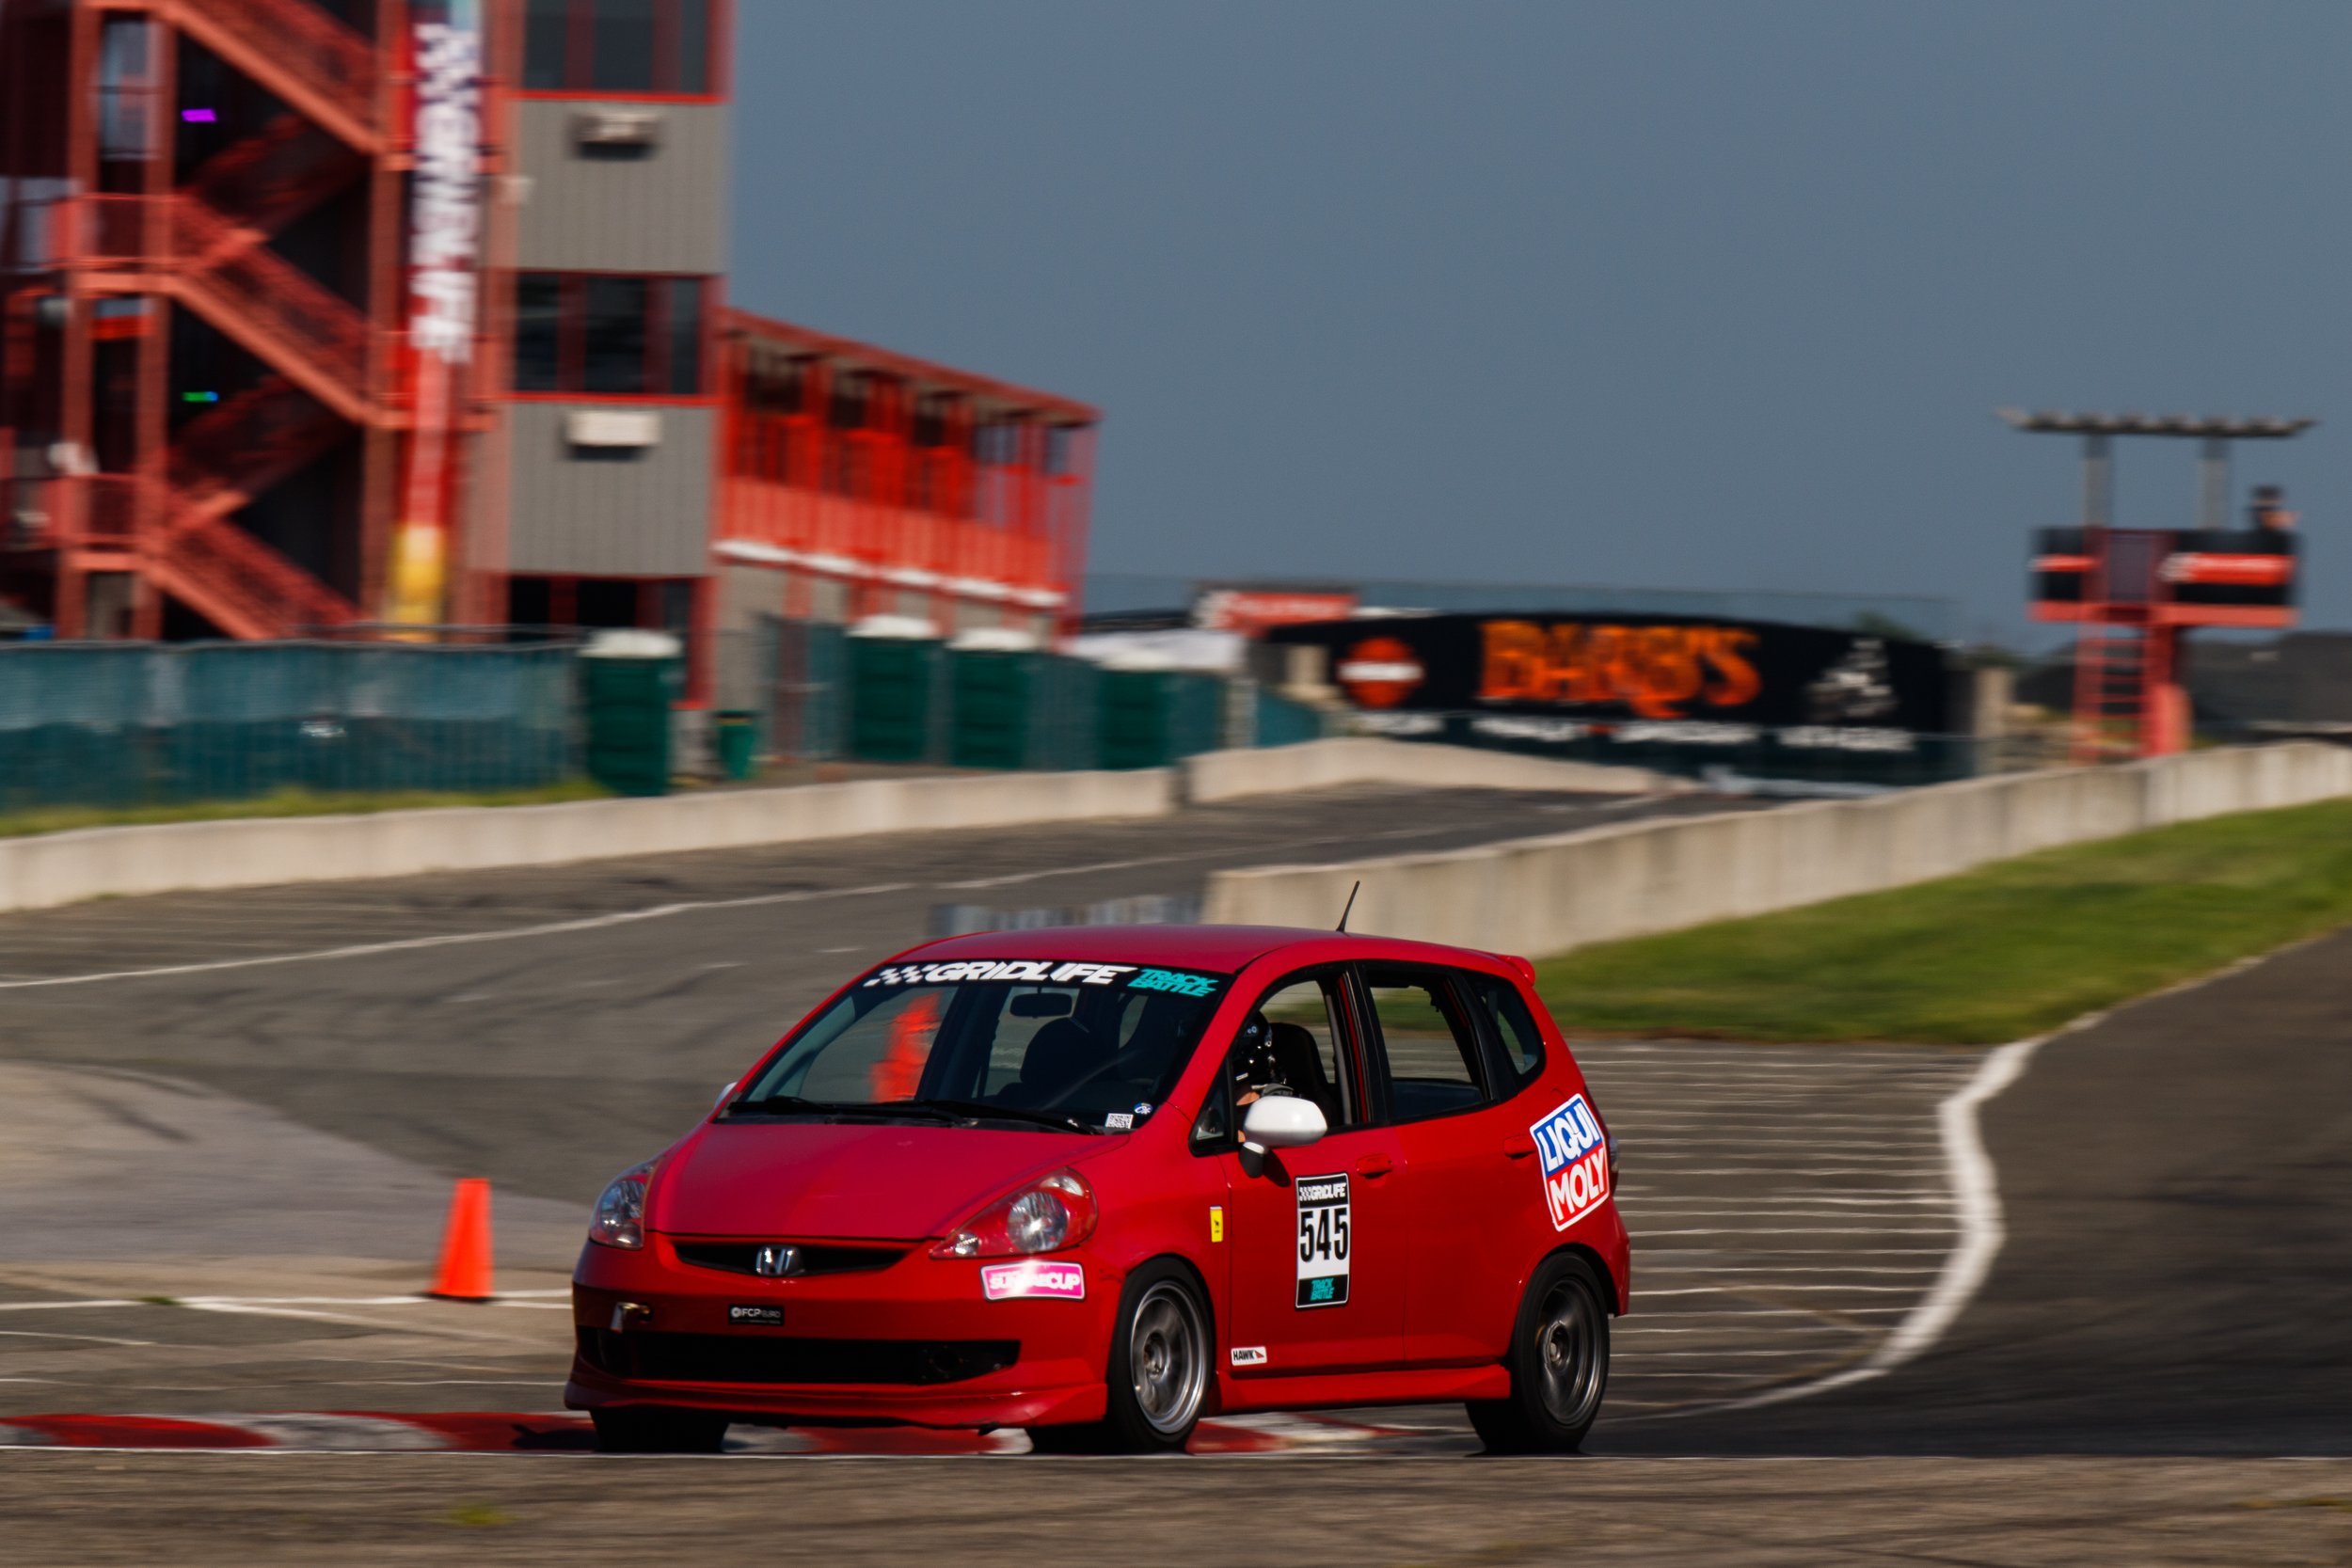  Danny Kruger, Mercedes Make Level Marketer, will be racing in his TrackBattle Sundae Cup class Gen 1 Honda Fit as well as the “Mini Cupper” FCP build project. 